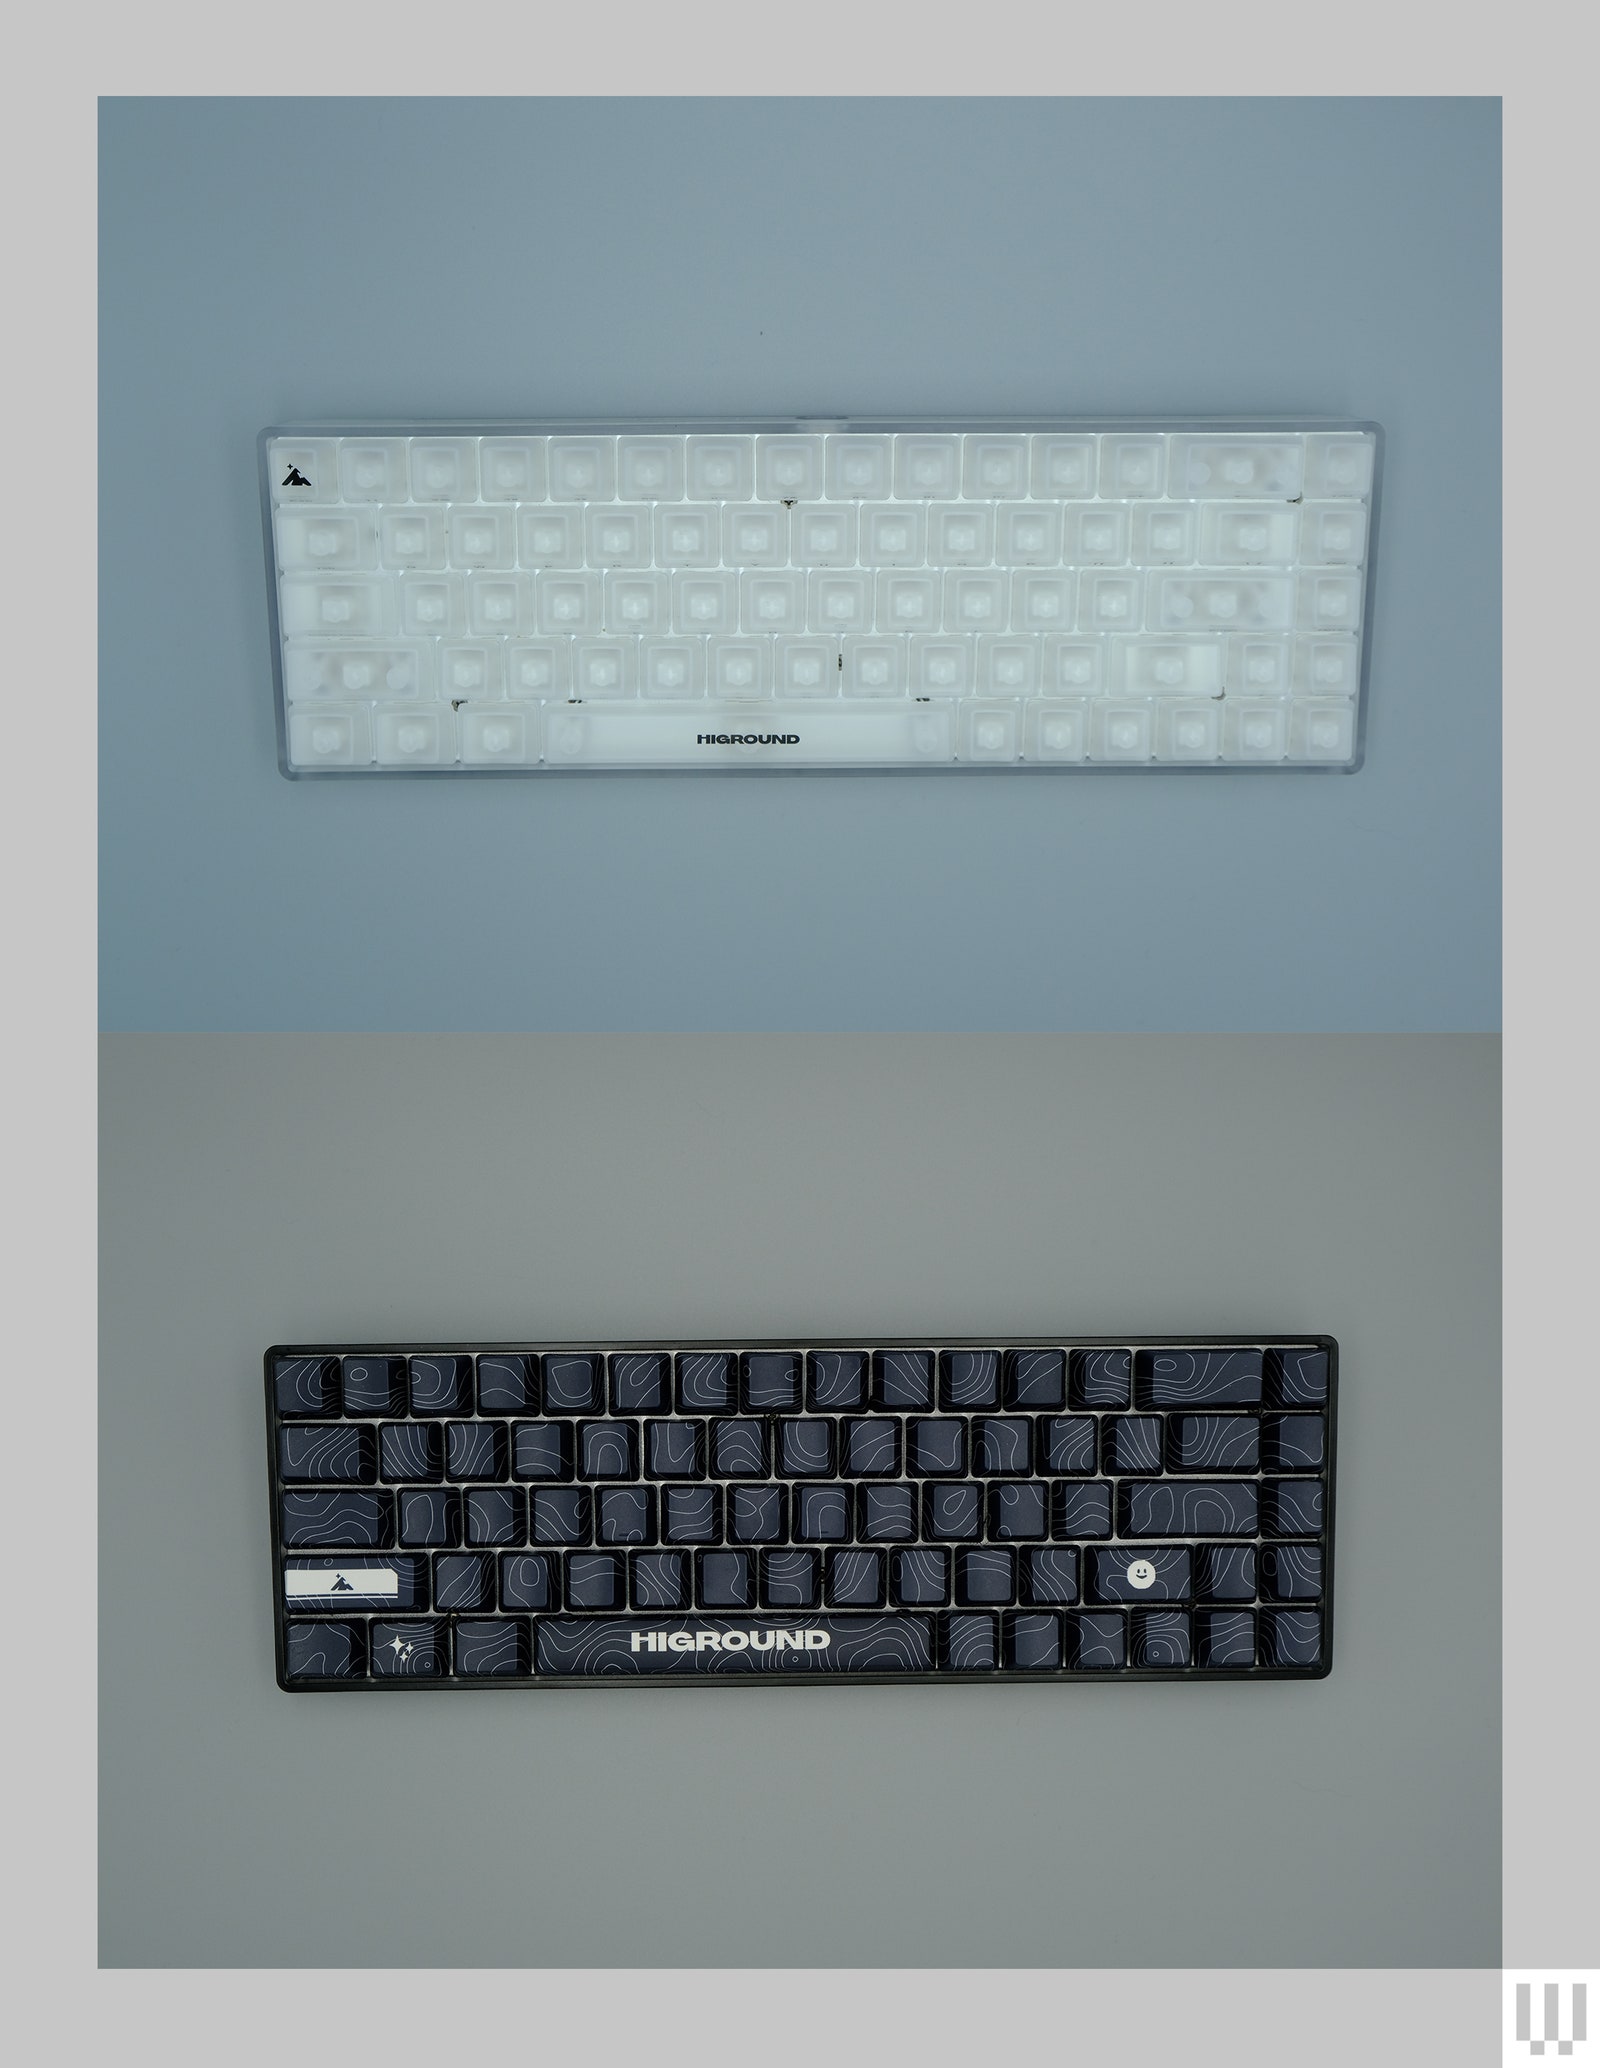 Two computer keyboards a white one on top and black on bottom